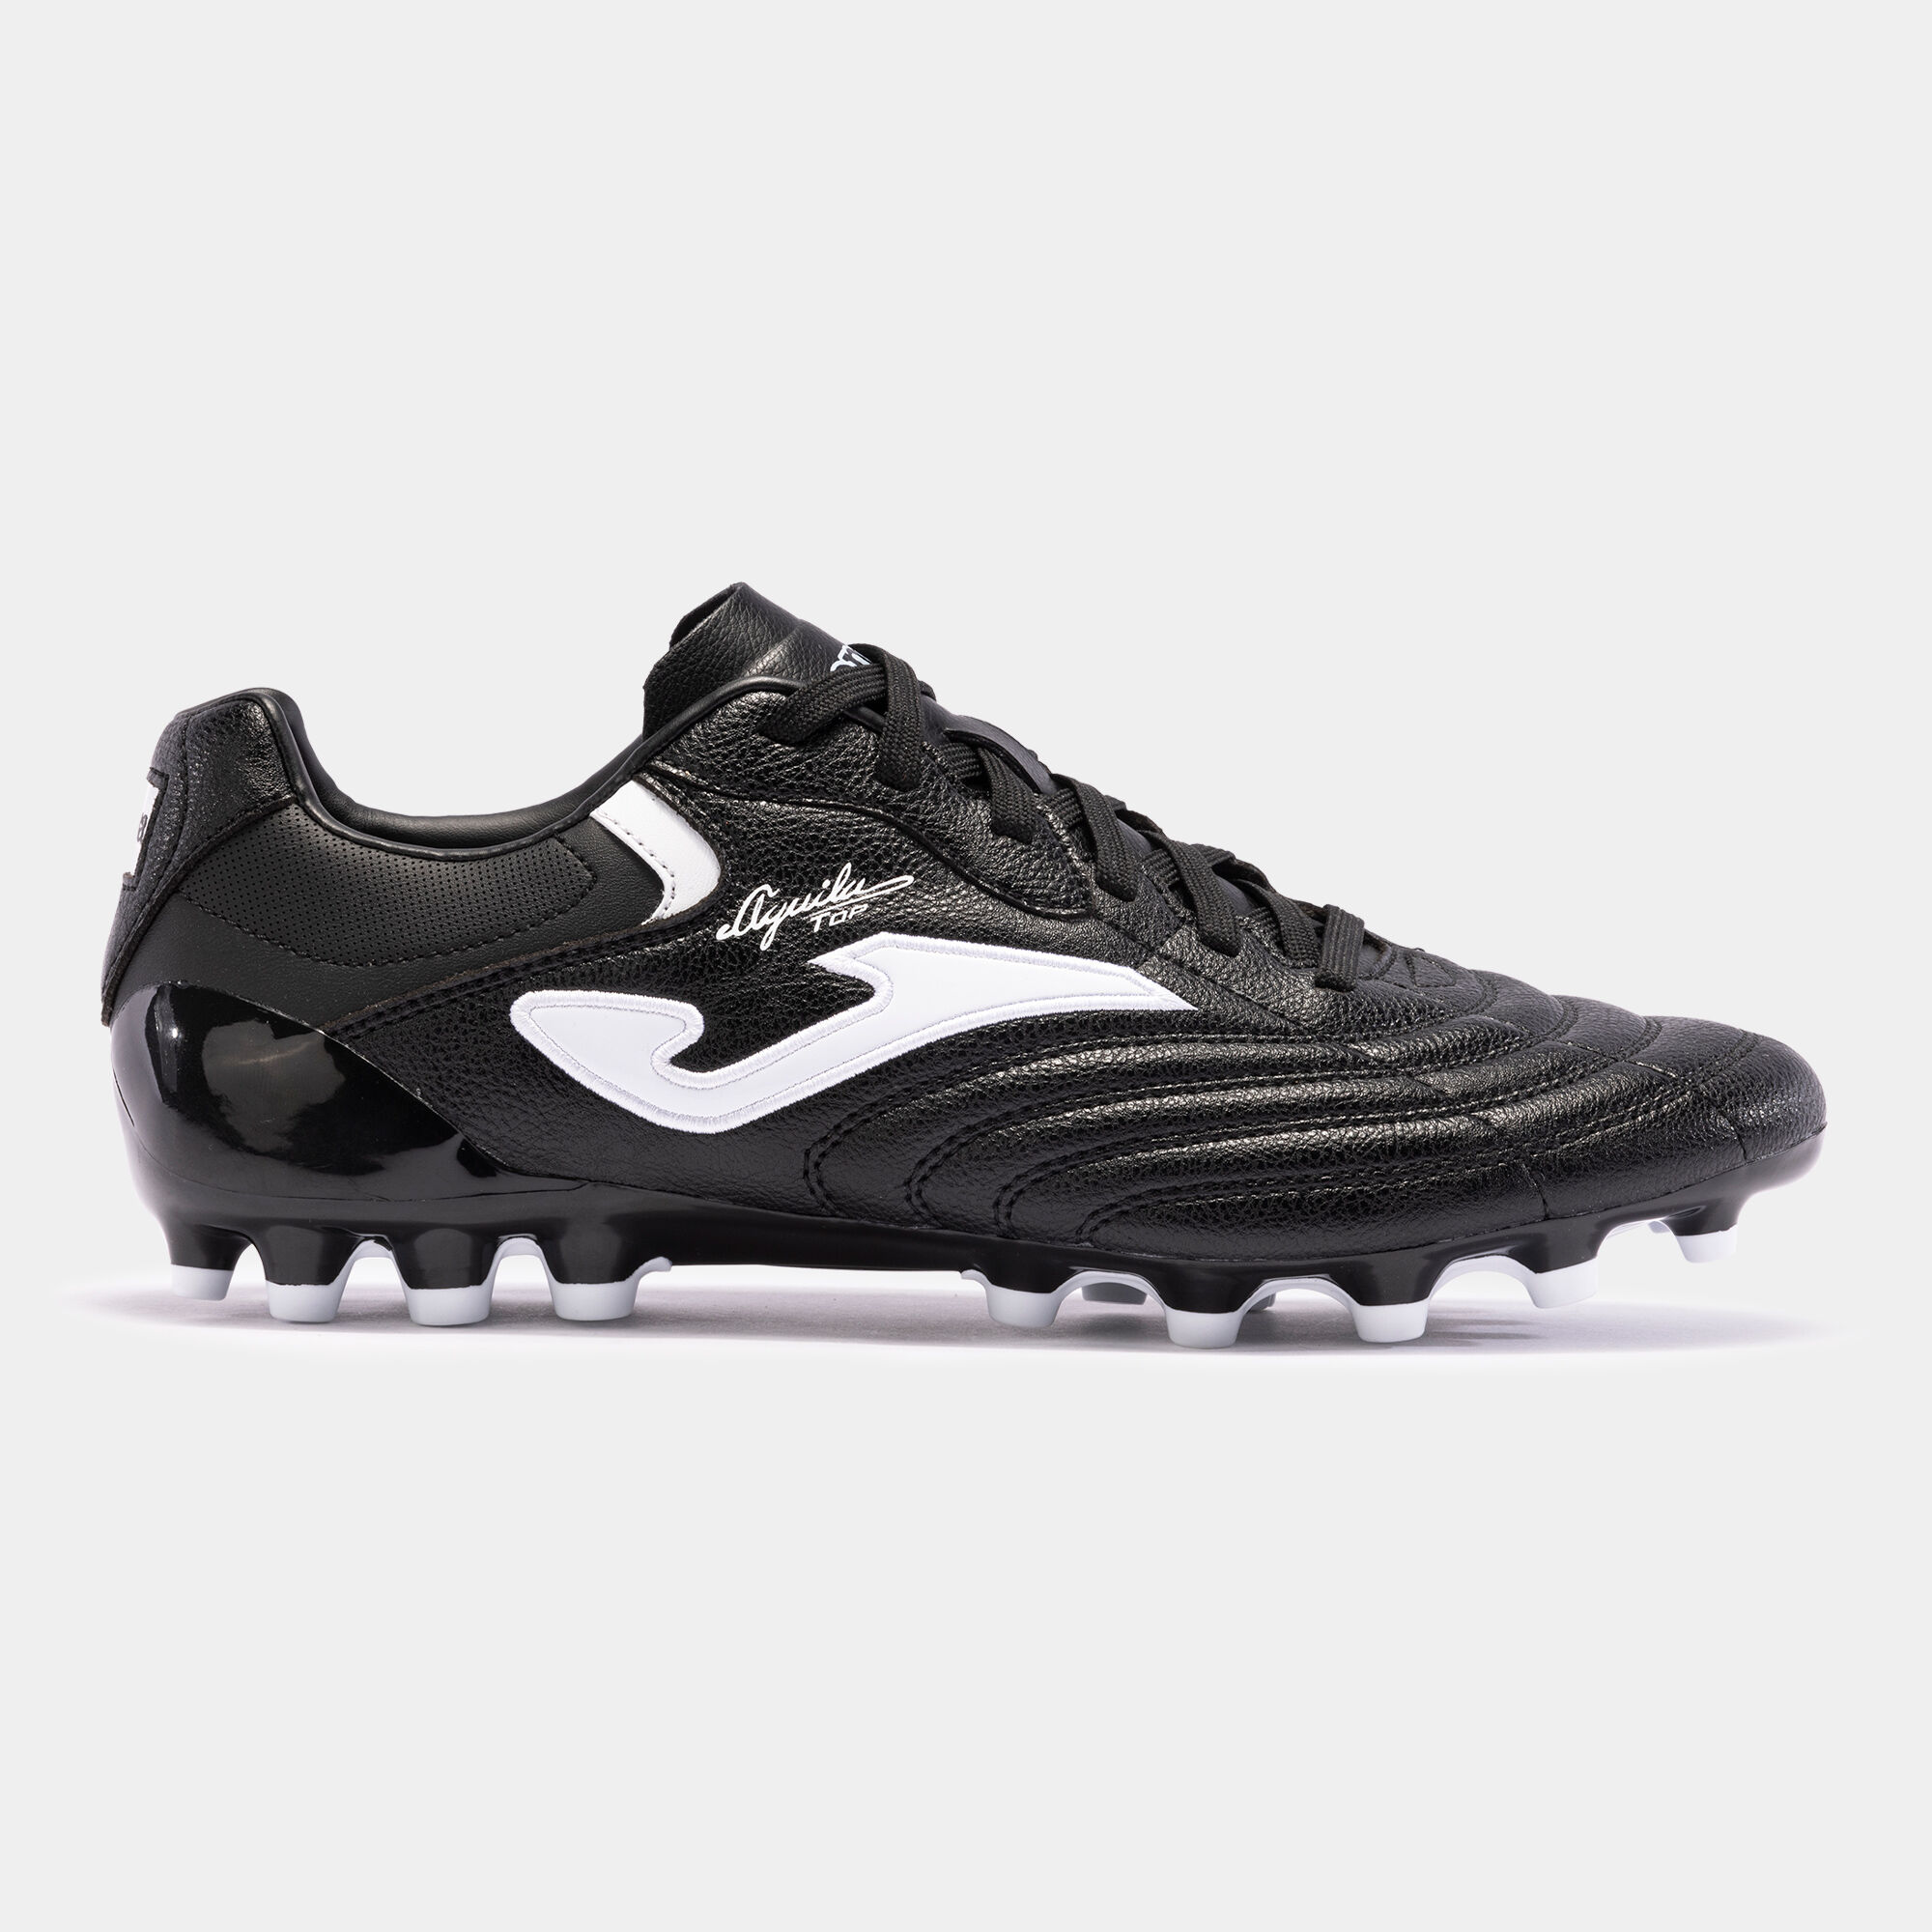 Football boots Aguila Cup 24 artificial grass black white